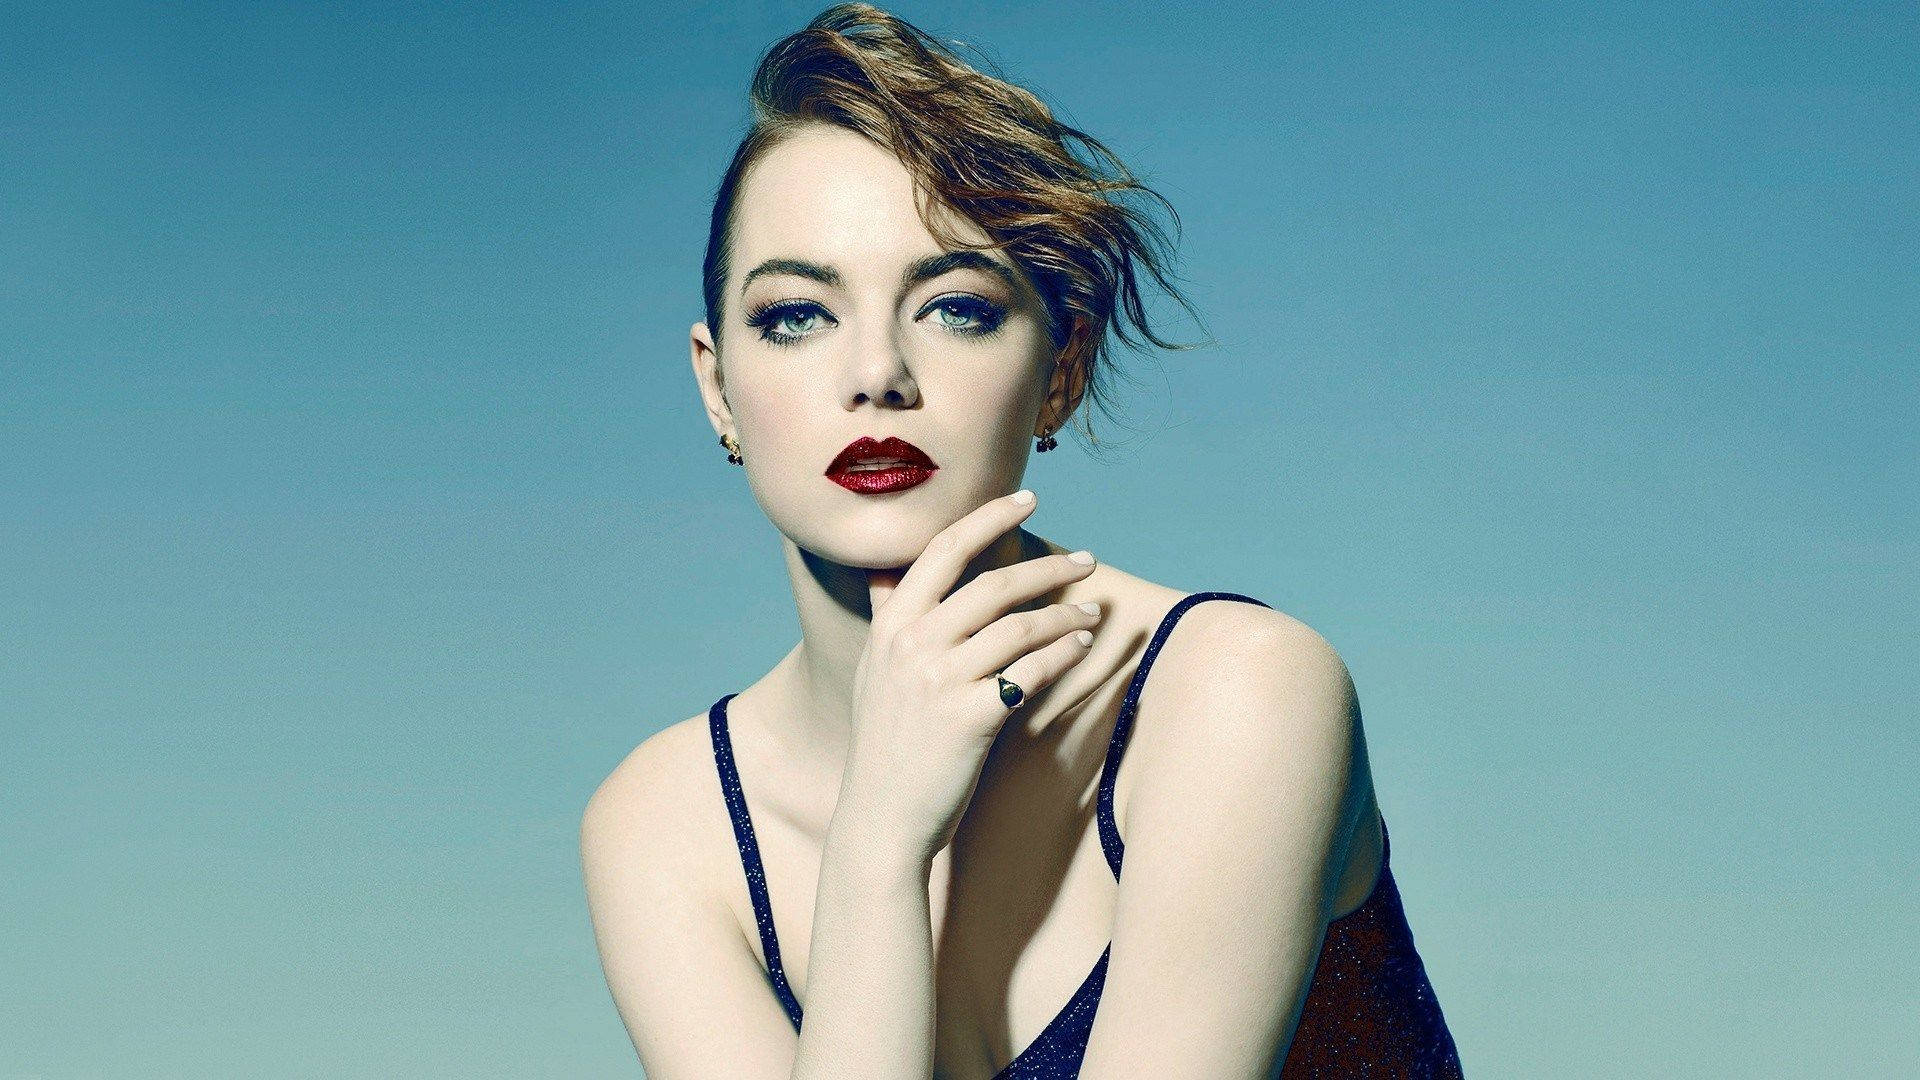 Free Emma Stone Wallpaper Downloads, [100+] Emma Stone Wallpapers for FREE  